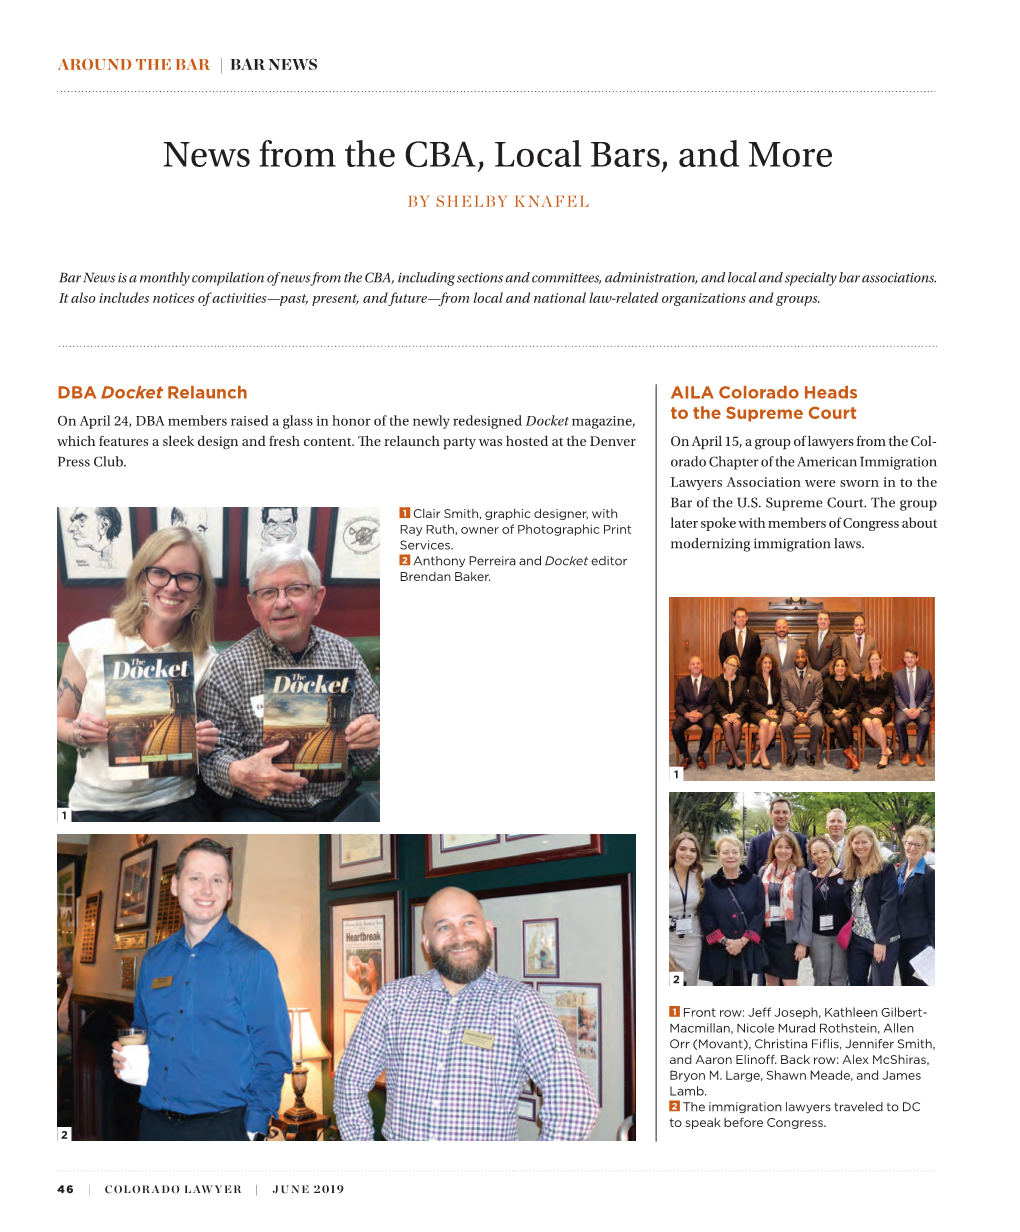 News from the CBA, Local Bars, and More